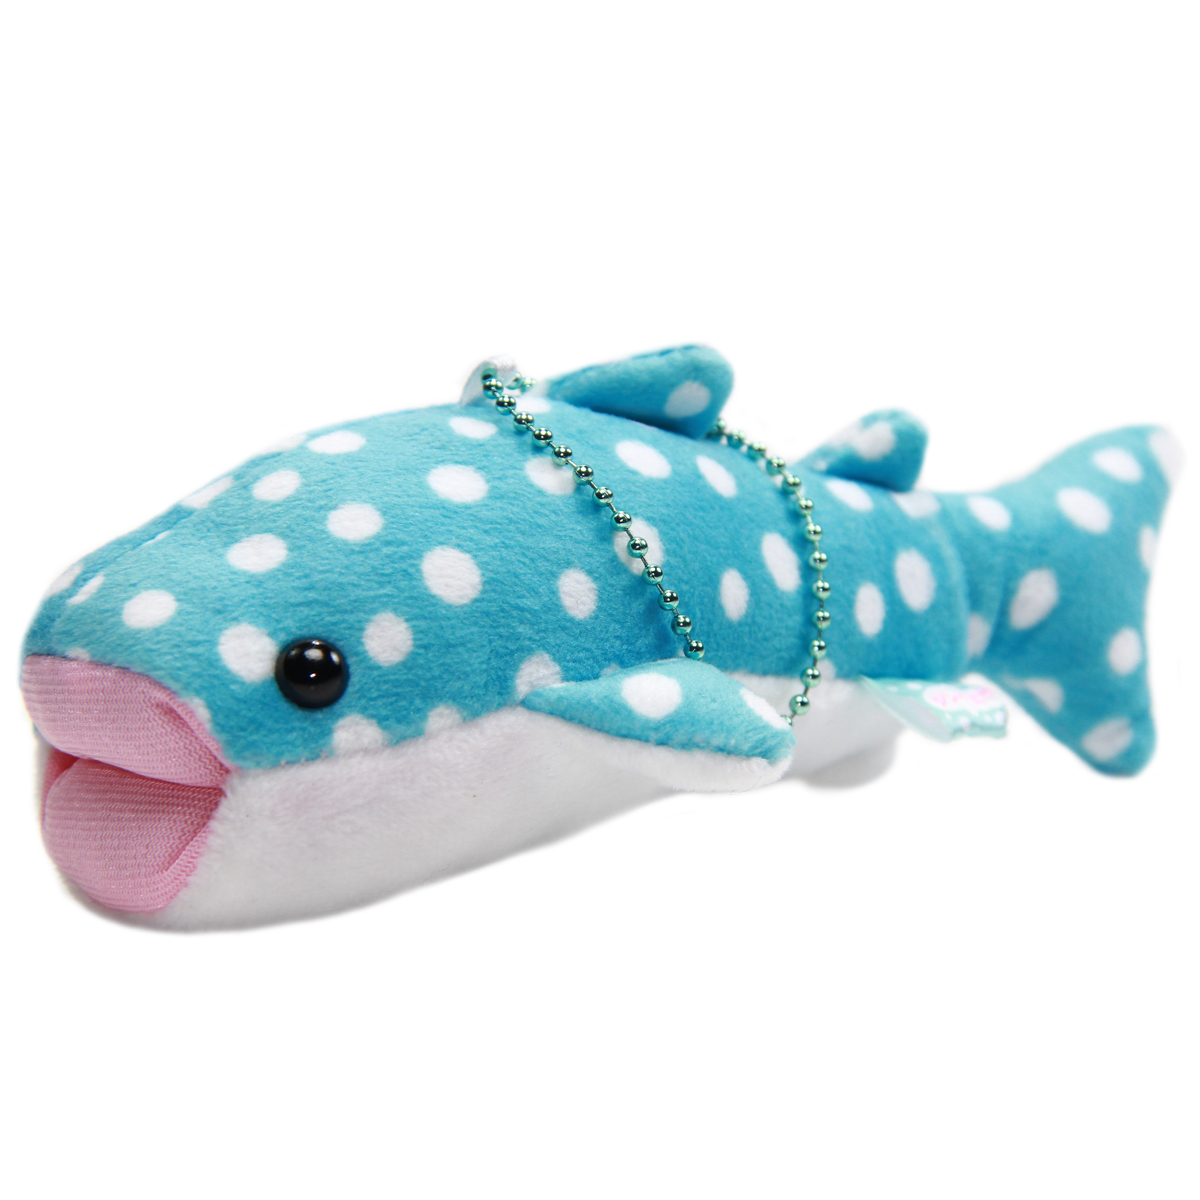 Amuse Whale Shark Dotted Plush Toy Stuffed Animal Light Blue White Keychain 6 Inches